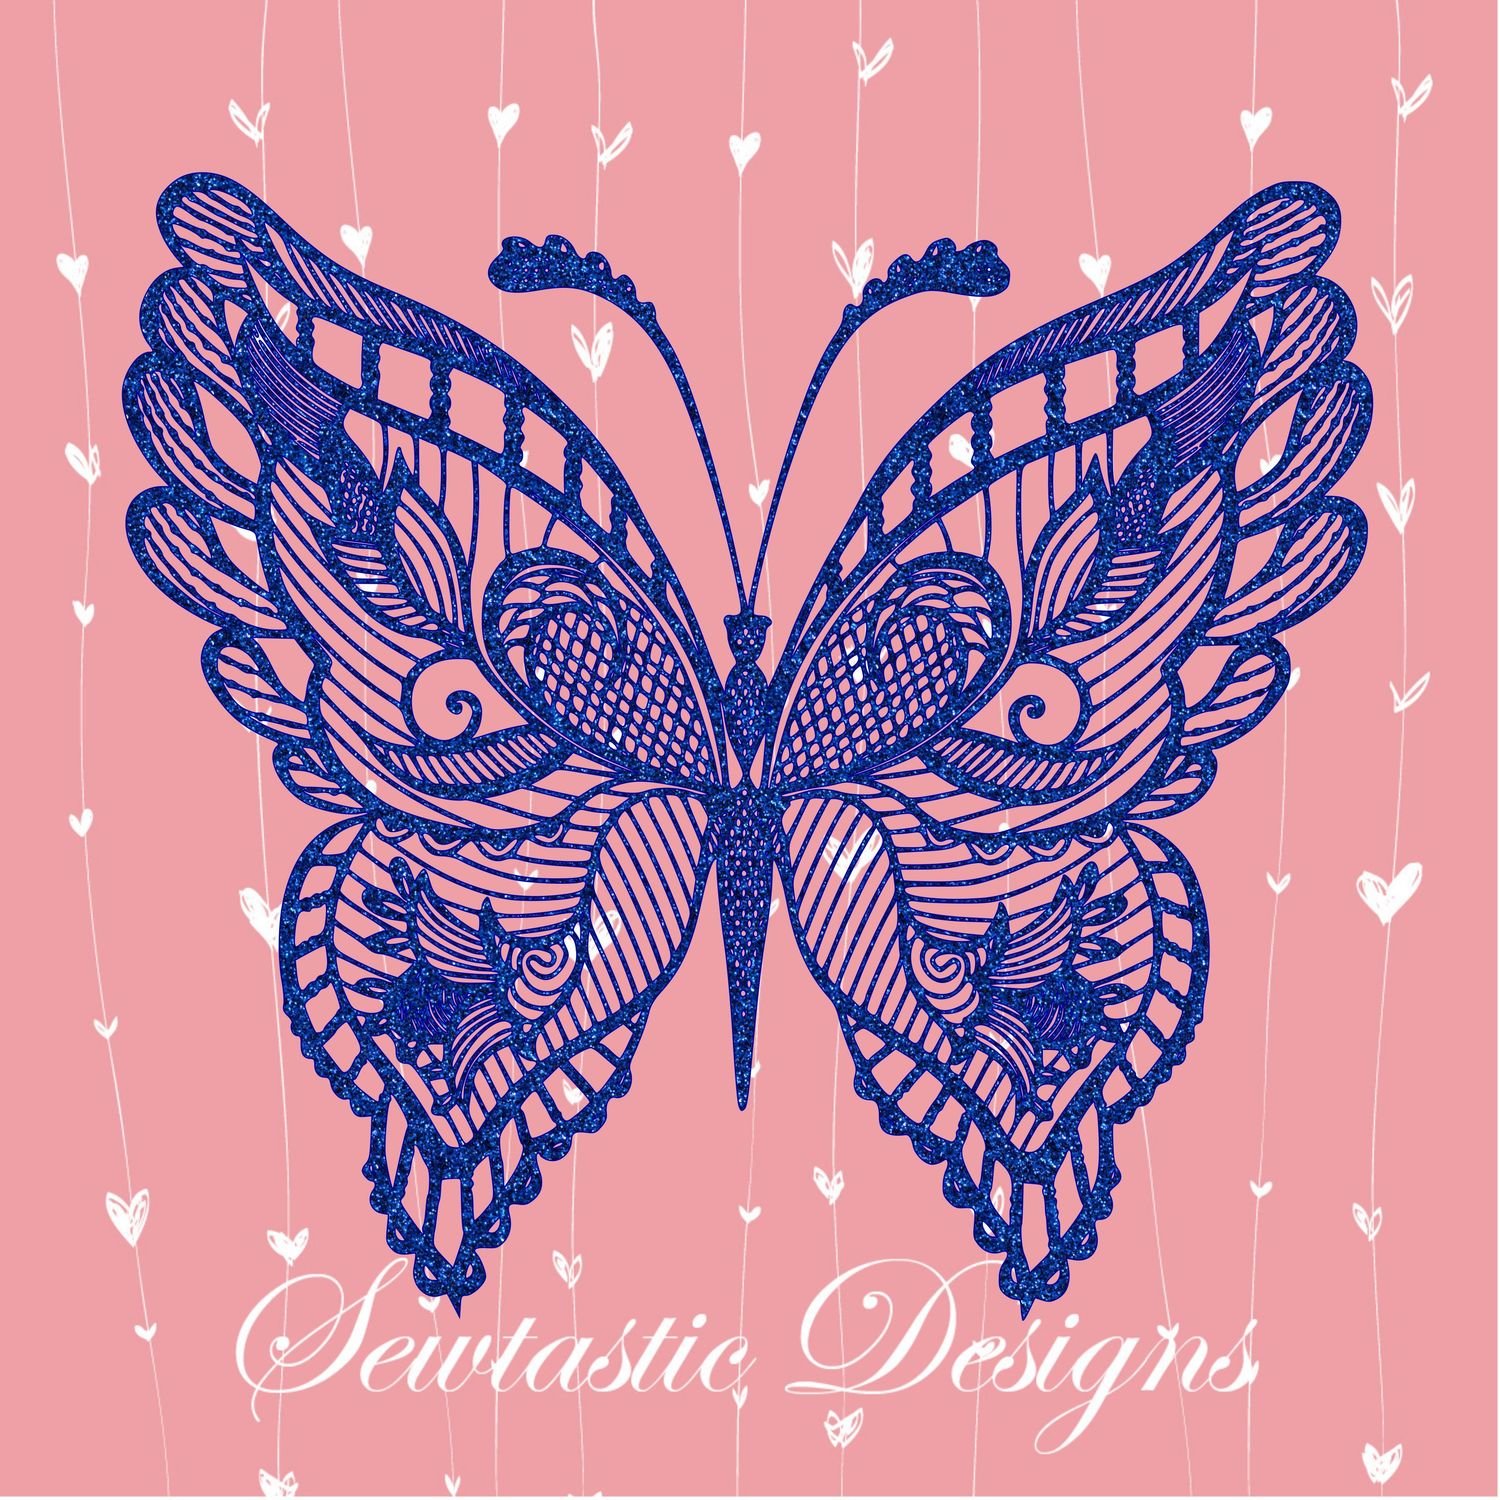 Download Butterfly Mandala Zentangle Svg Butterfly Svg Mandala Svg Zentangle Svg Cut File Iron On Decal Cricut Silhouette Scanncut Many More SVG, PNG, EPS, DXF File